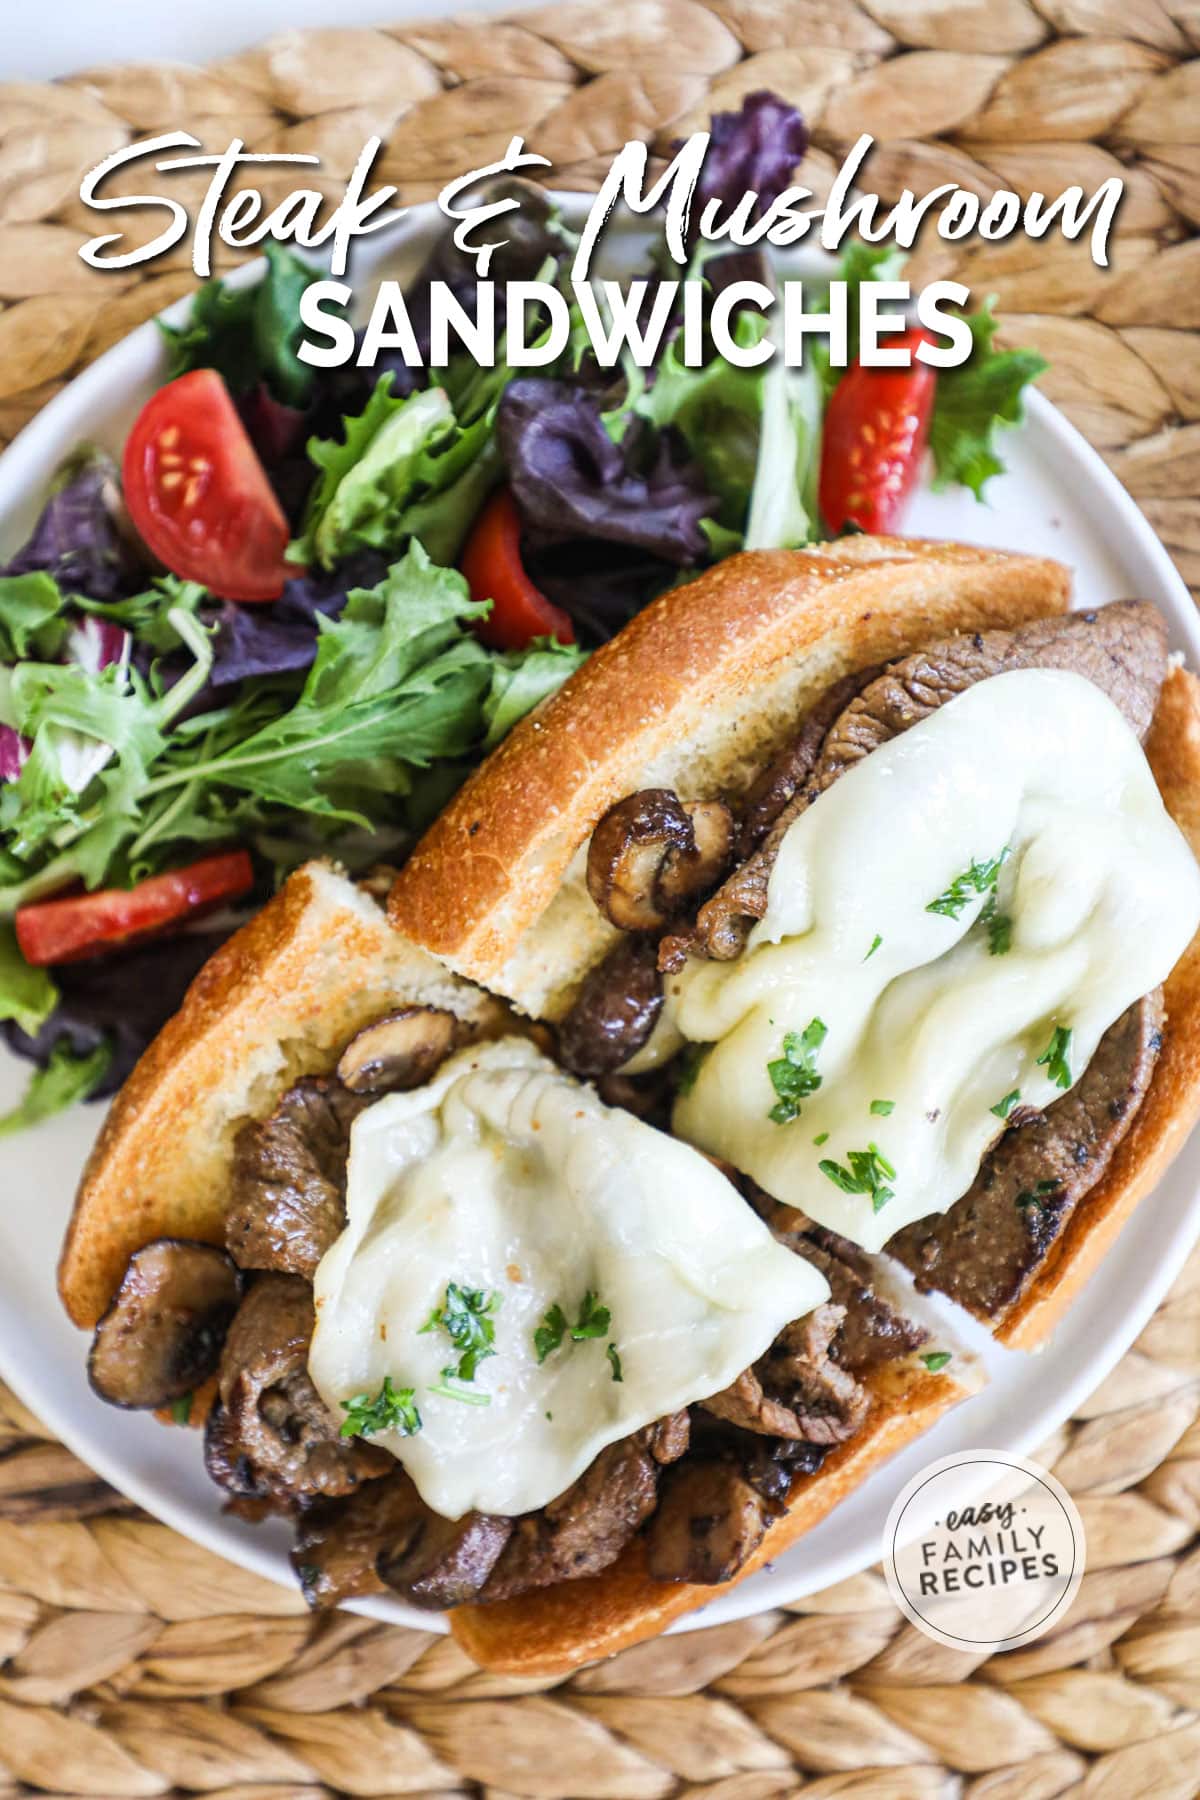 Steak and mushroom sandwich with melted cheese on toasted bread next to a side salad.